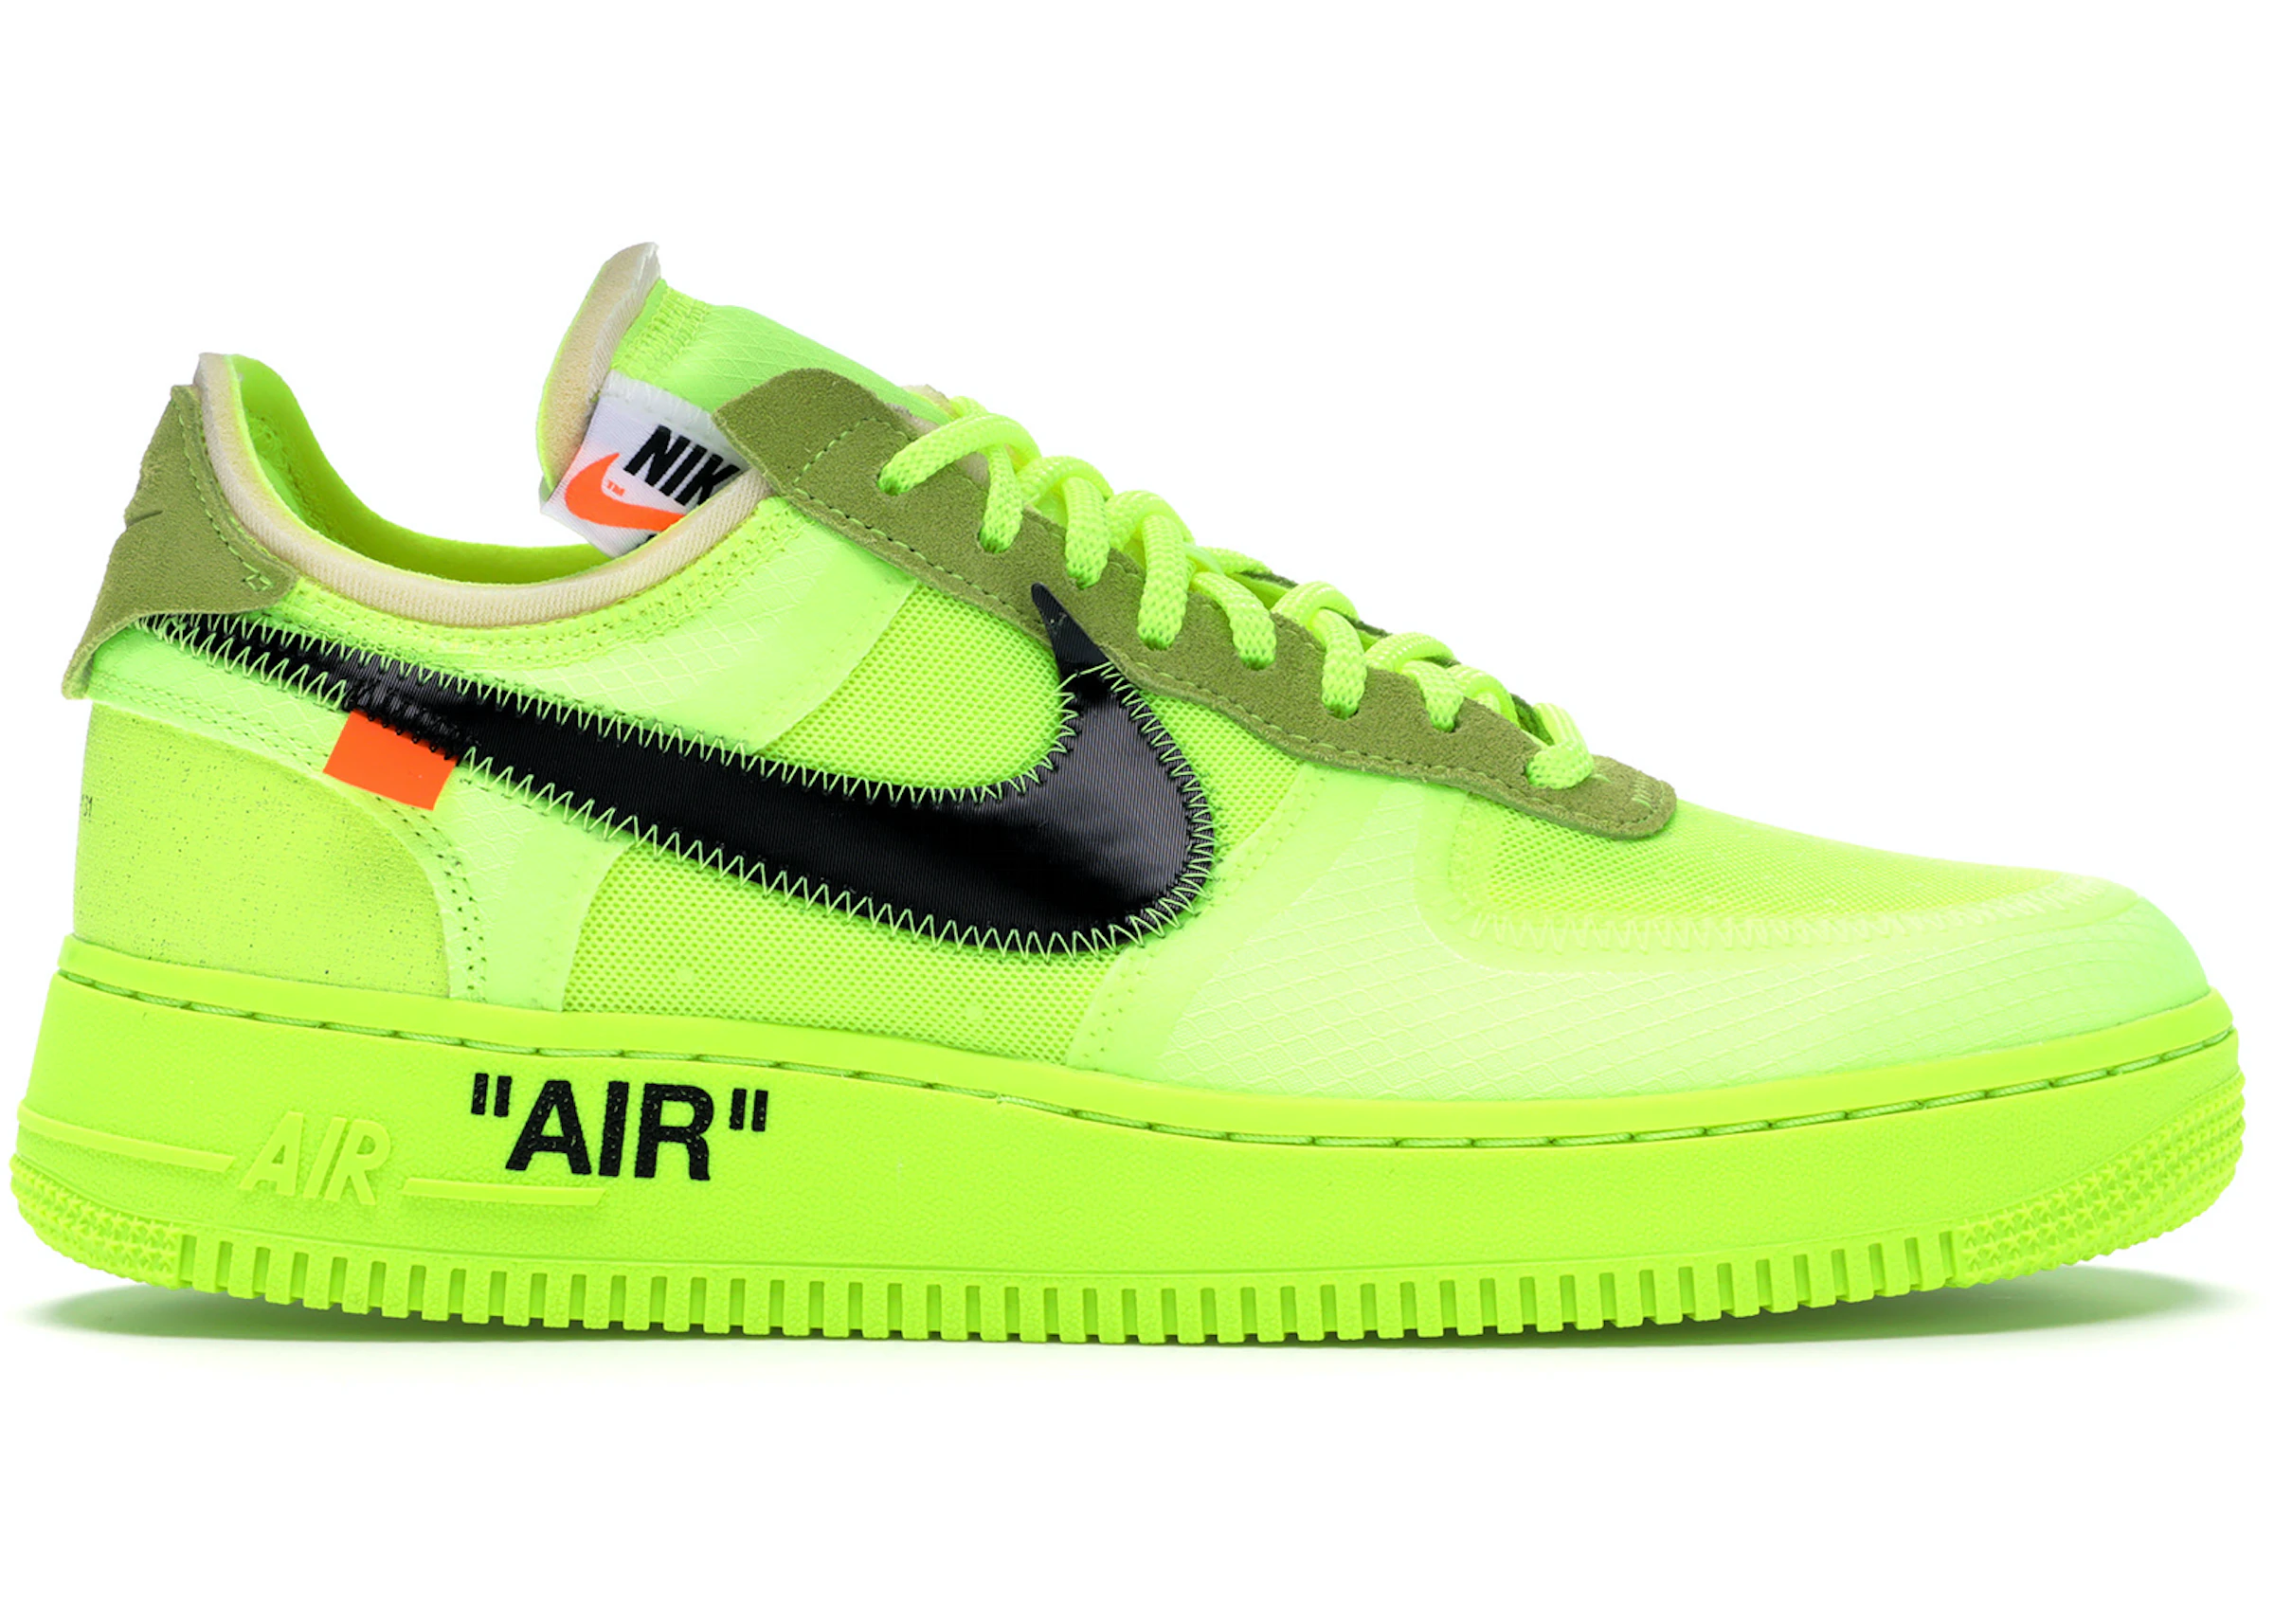 Are depressed have confidence Terminology Nike Air Force 1 Low Off-White Volt - AO4606-700 - US